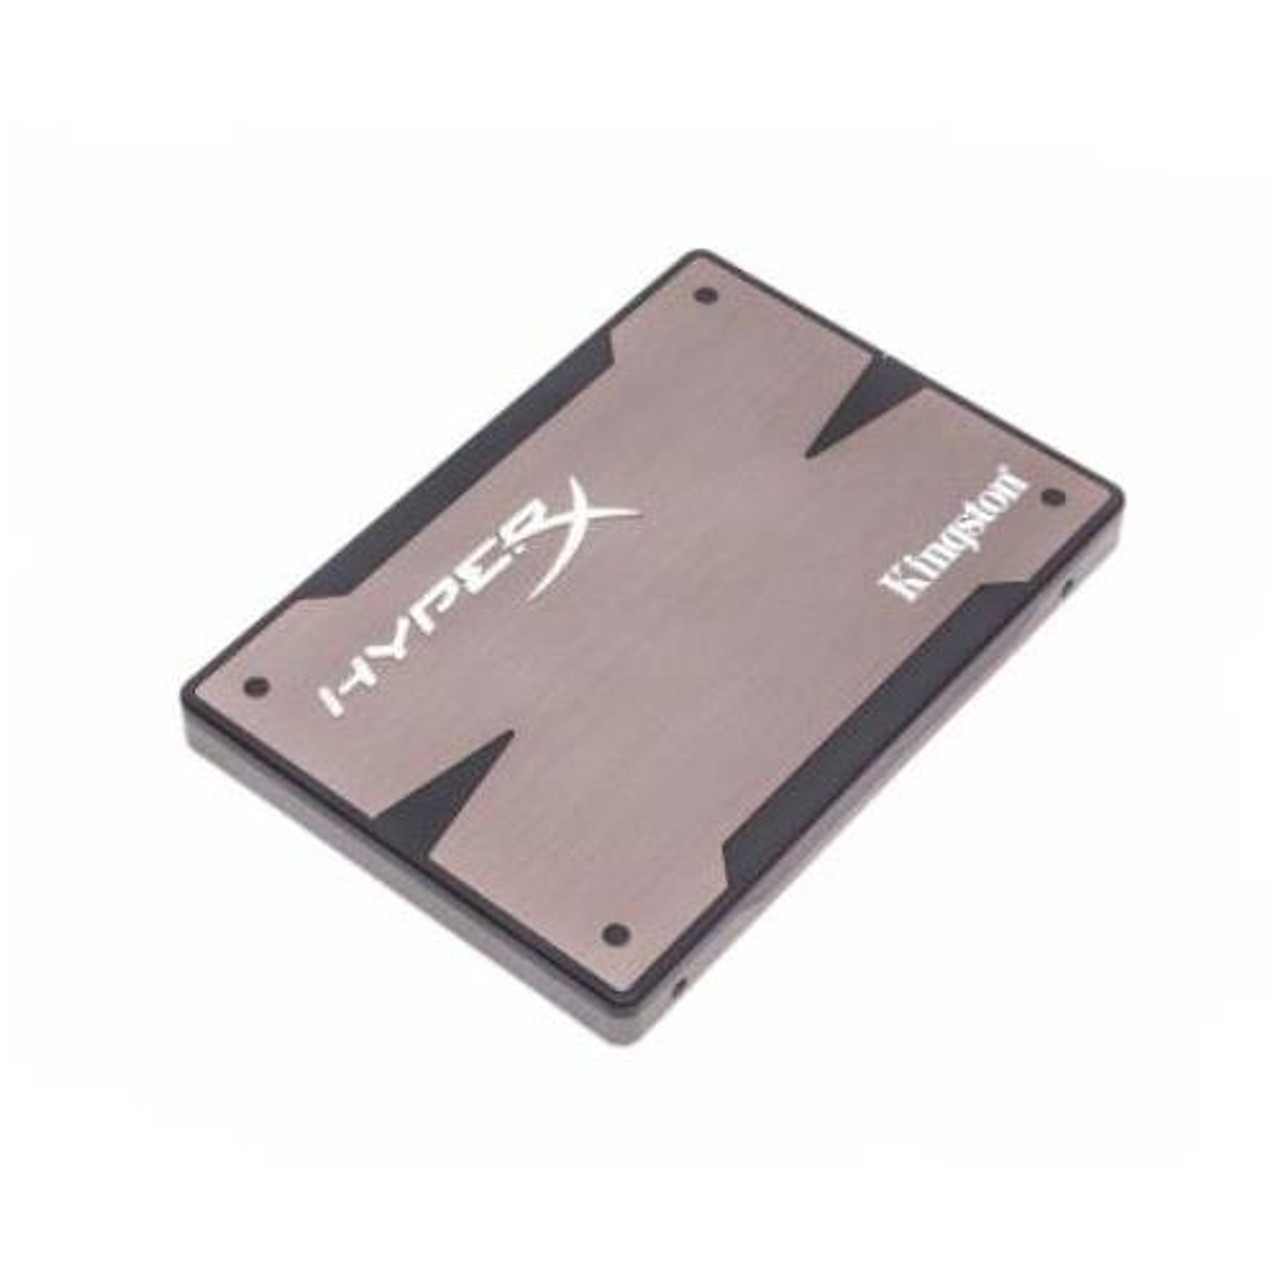 SHFS37A/240G Kingston 6.0 Gbps Solid State Drive